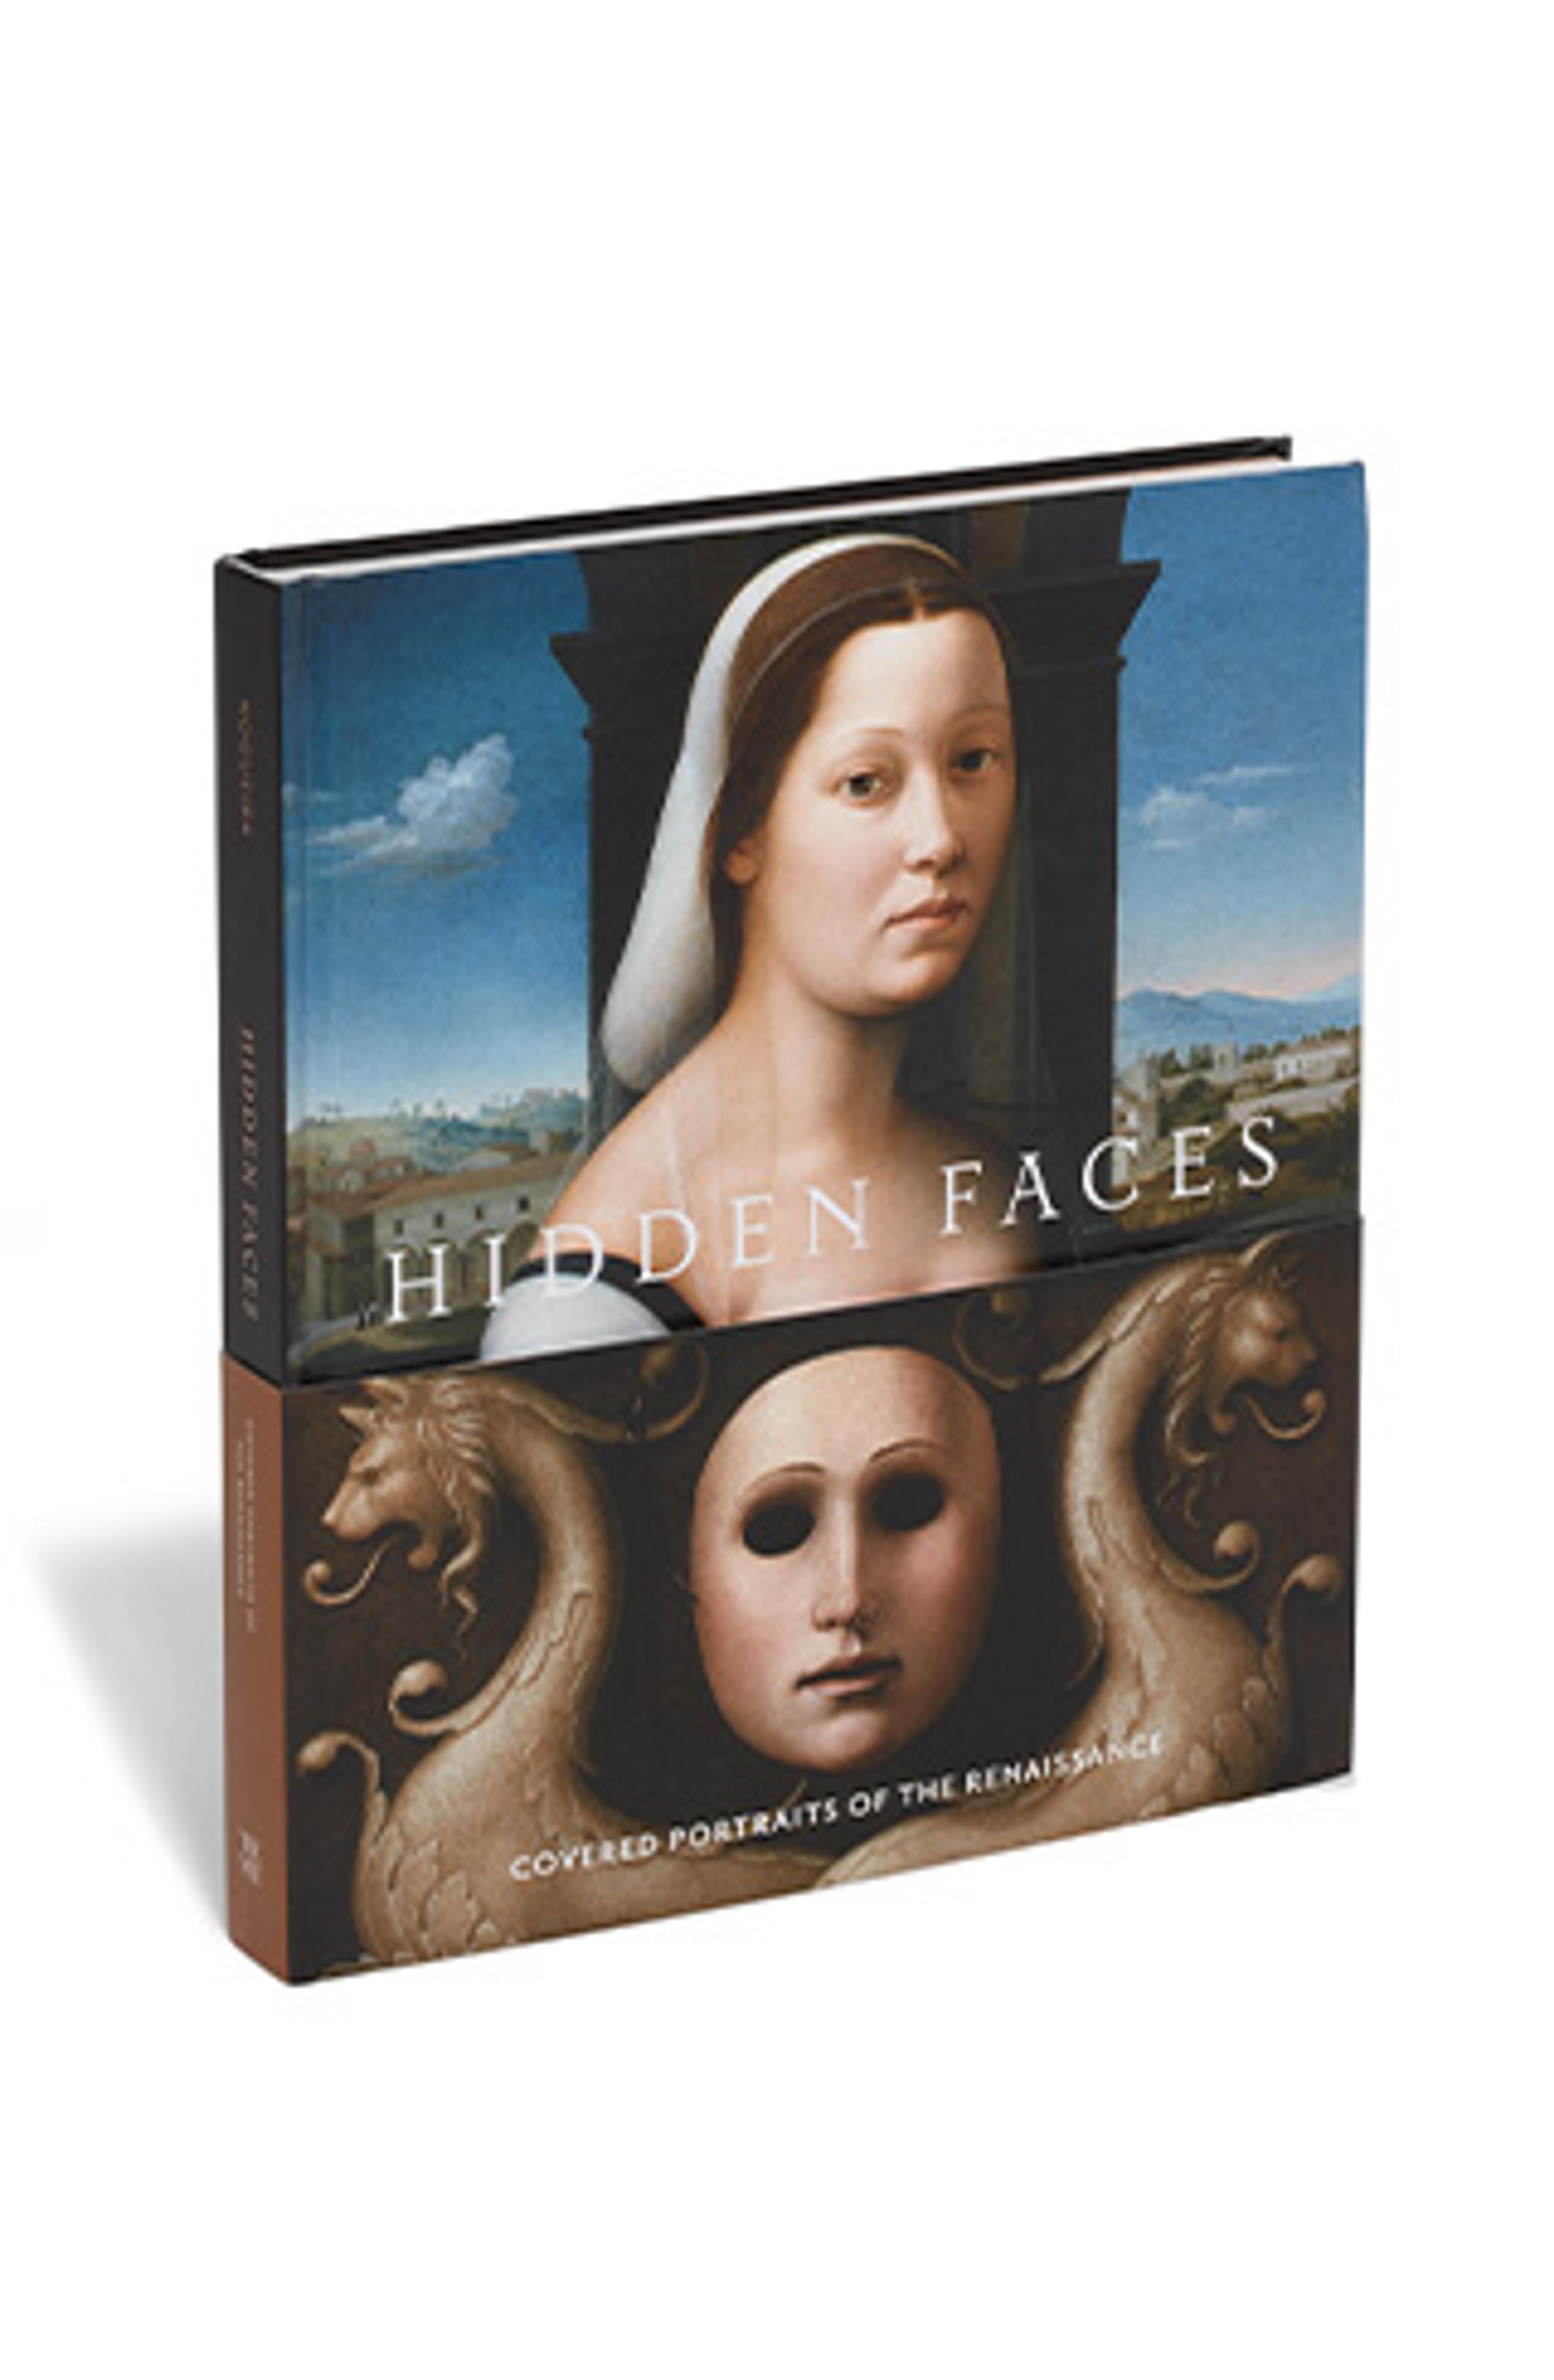 A book titled "hidden faces: coupled portraits of the renaissance" with a cover art merging two classic portraits, hinting at a rich exploration of transformative art from the renaissance period.